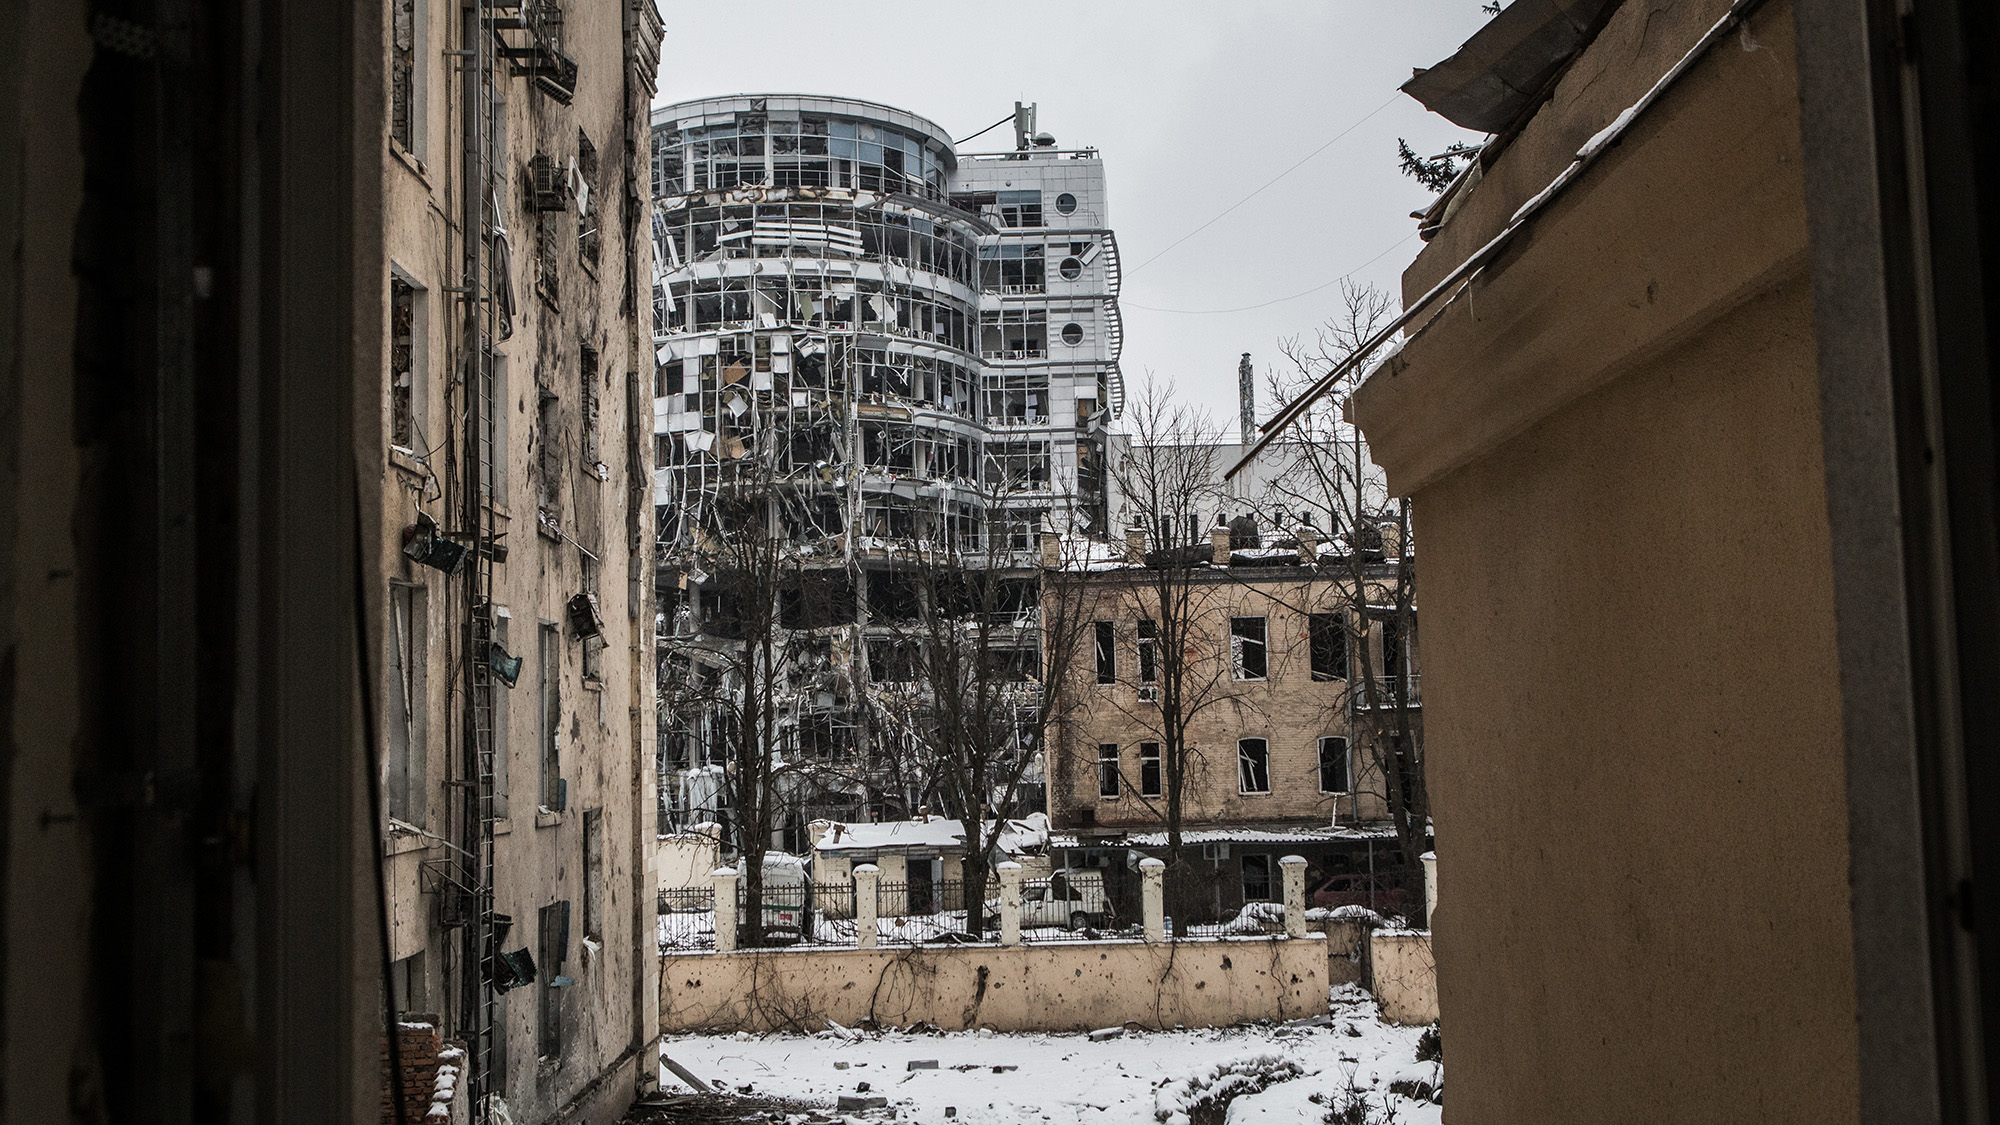 The bomb damaged Governor's Palace is seen March 9, 2022 in Kharkiv, Ukraine on March 09, 2022.